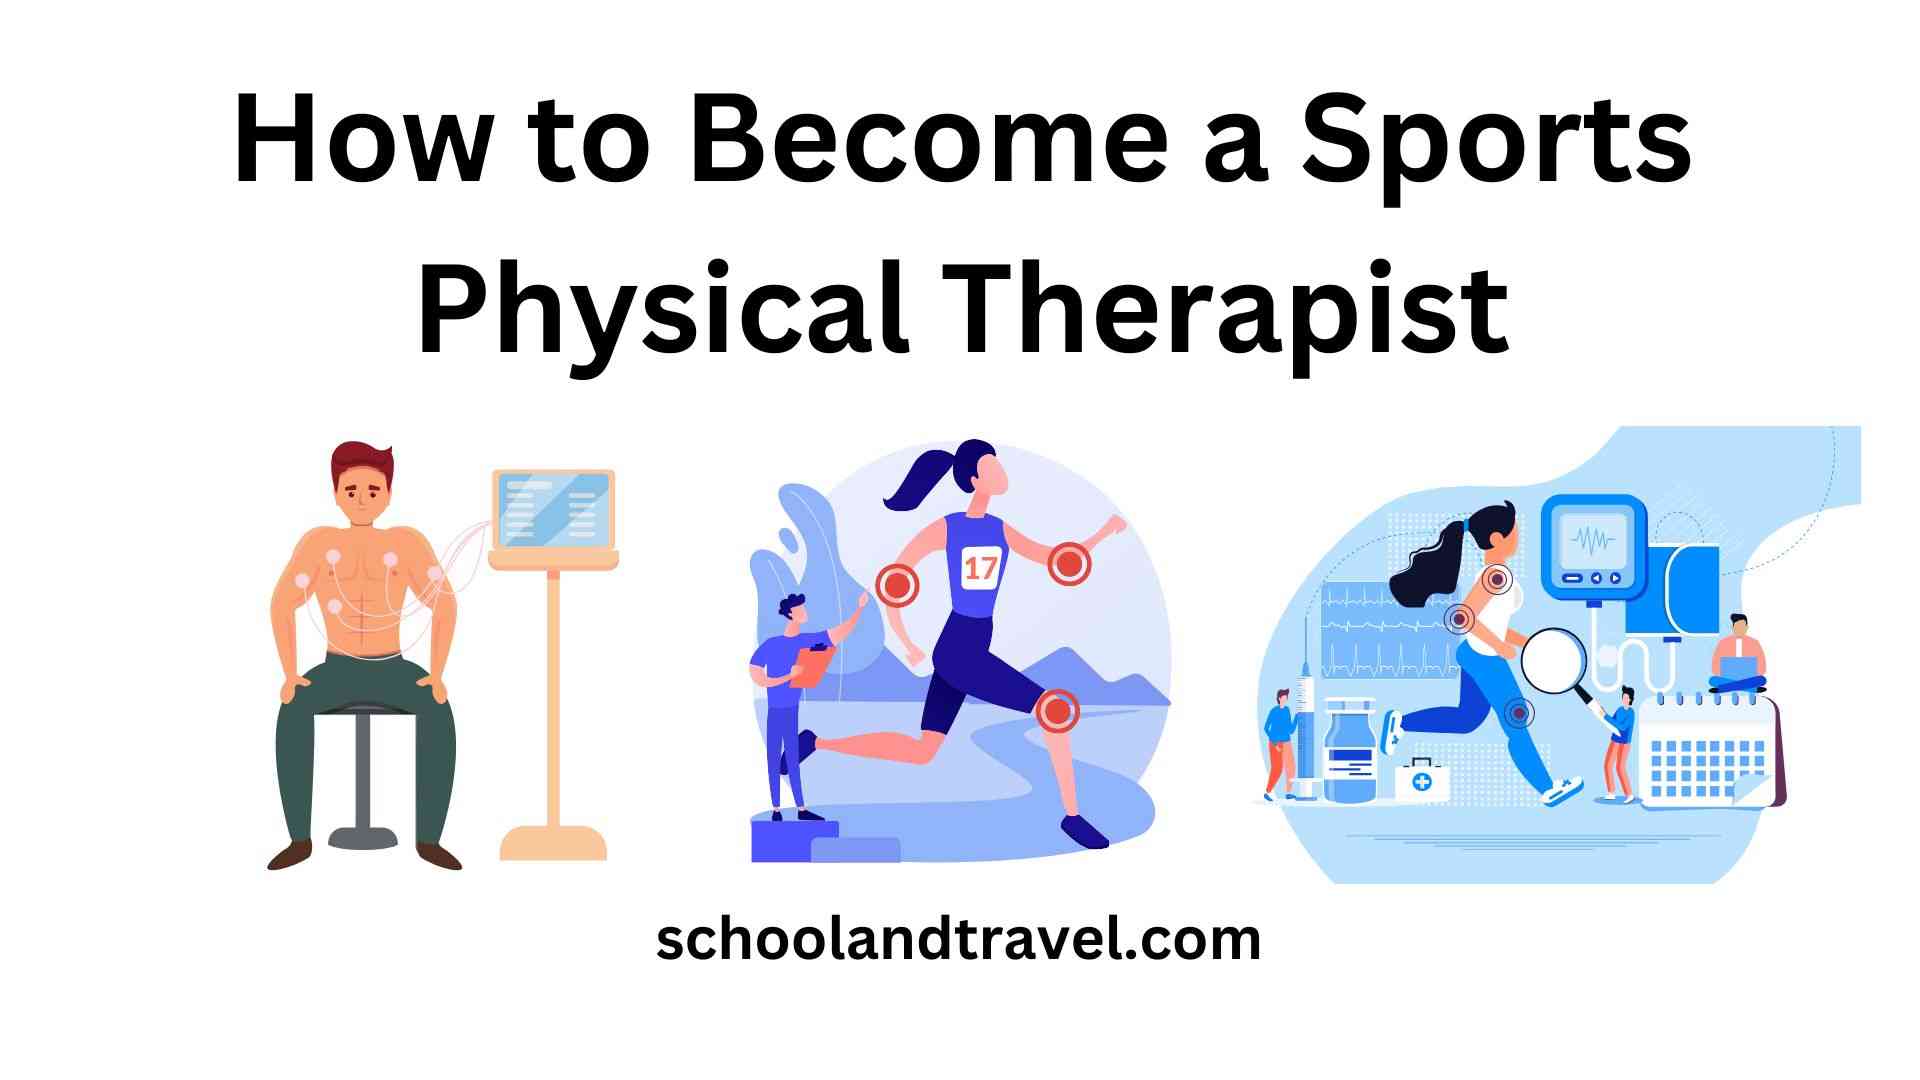 Become a Sports Physical Therapist